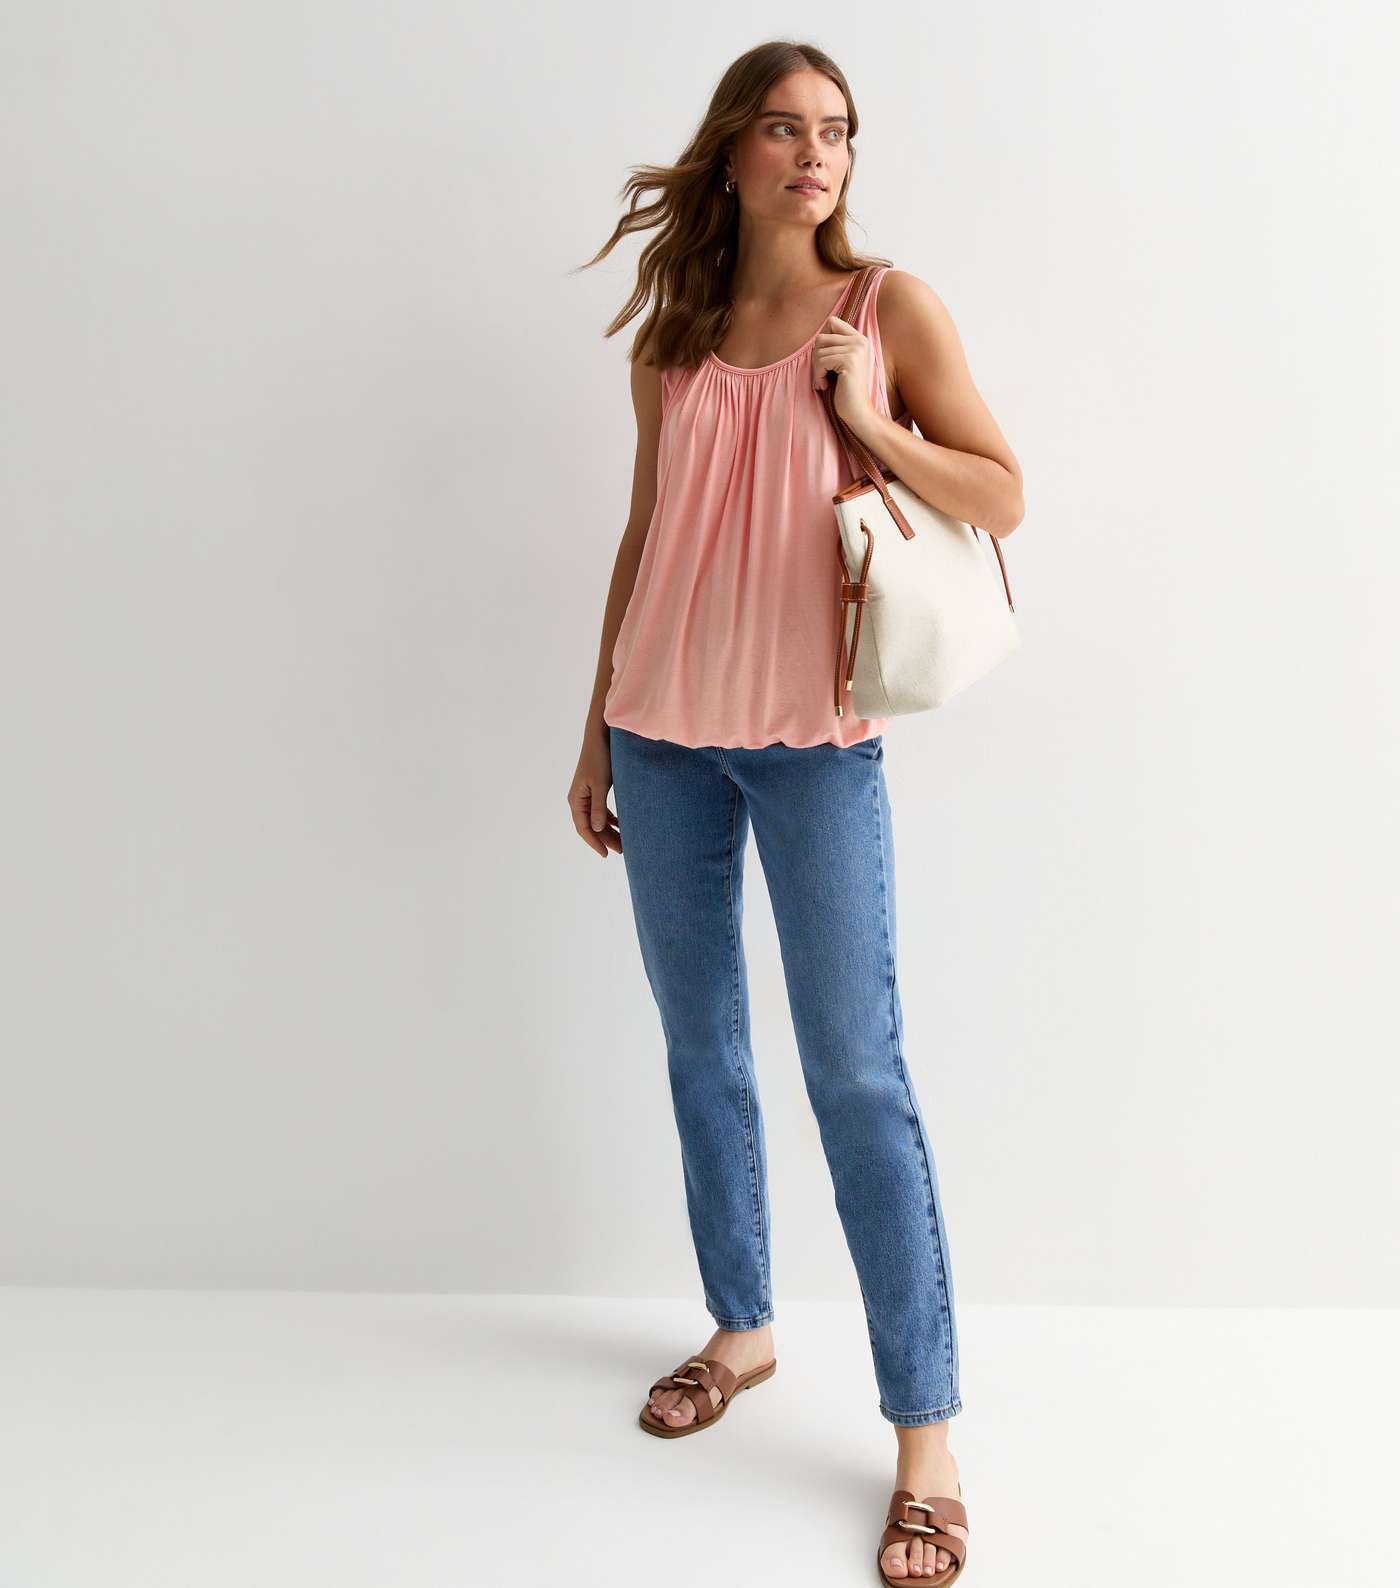 Gini London Pink Oversized Top Image 3